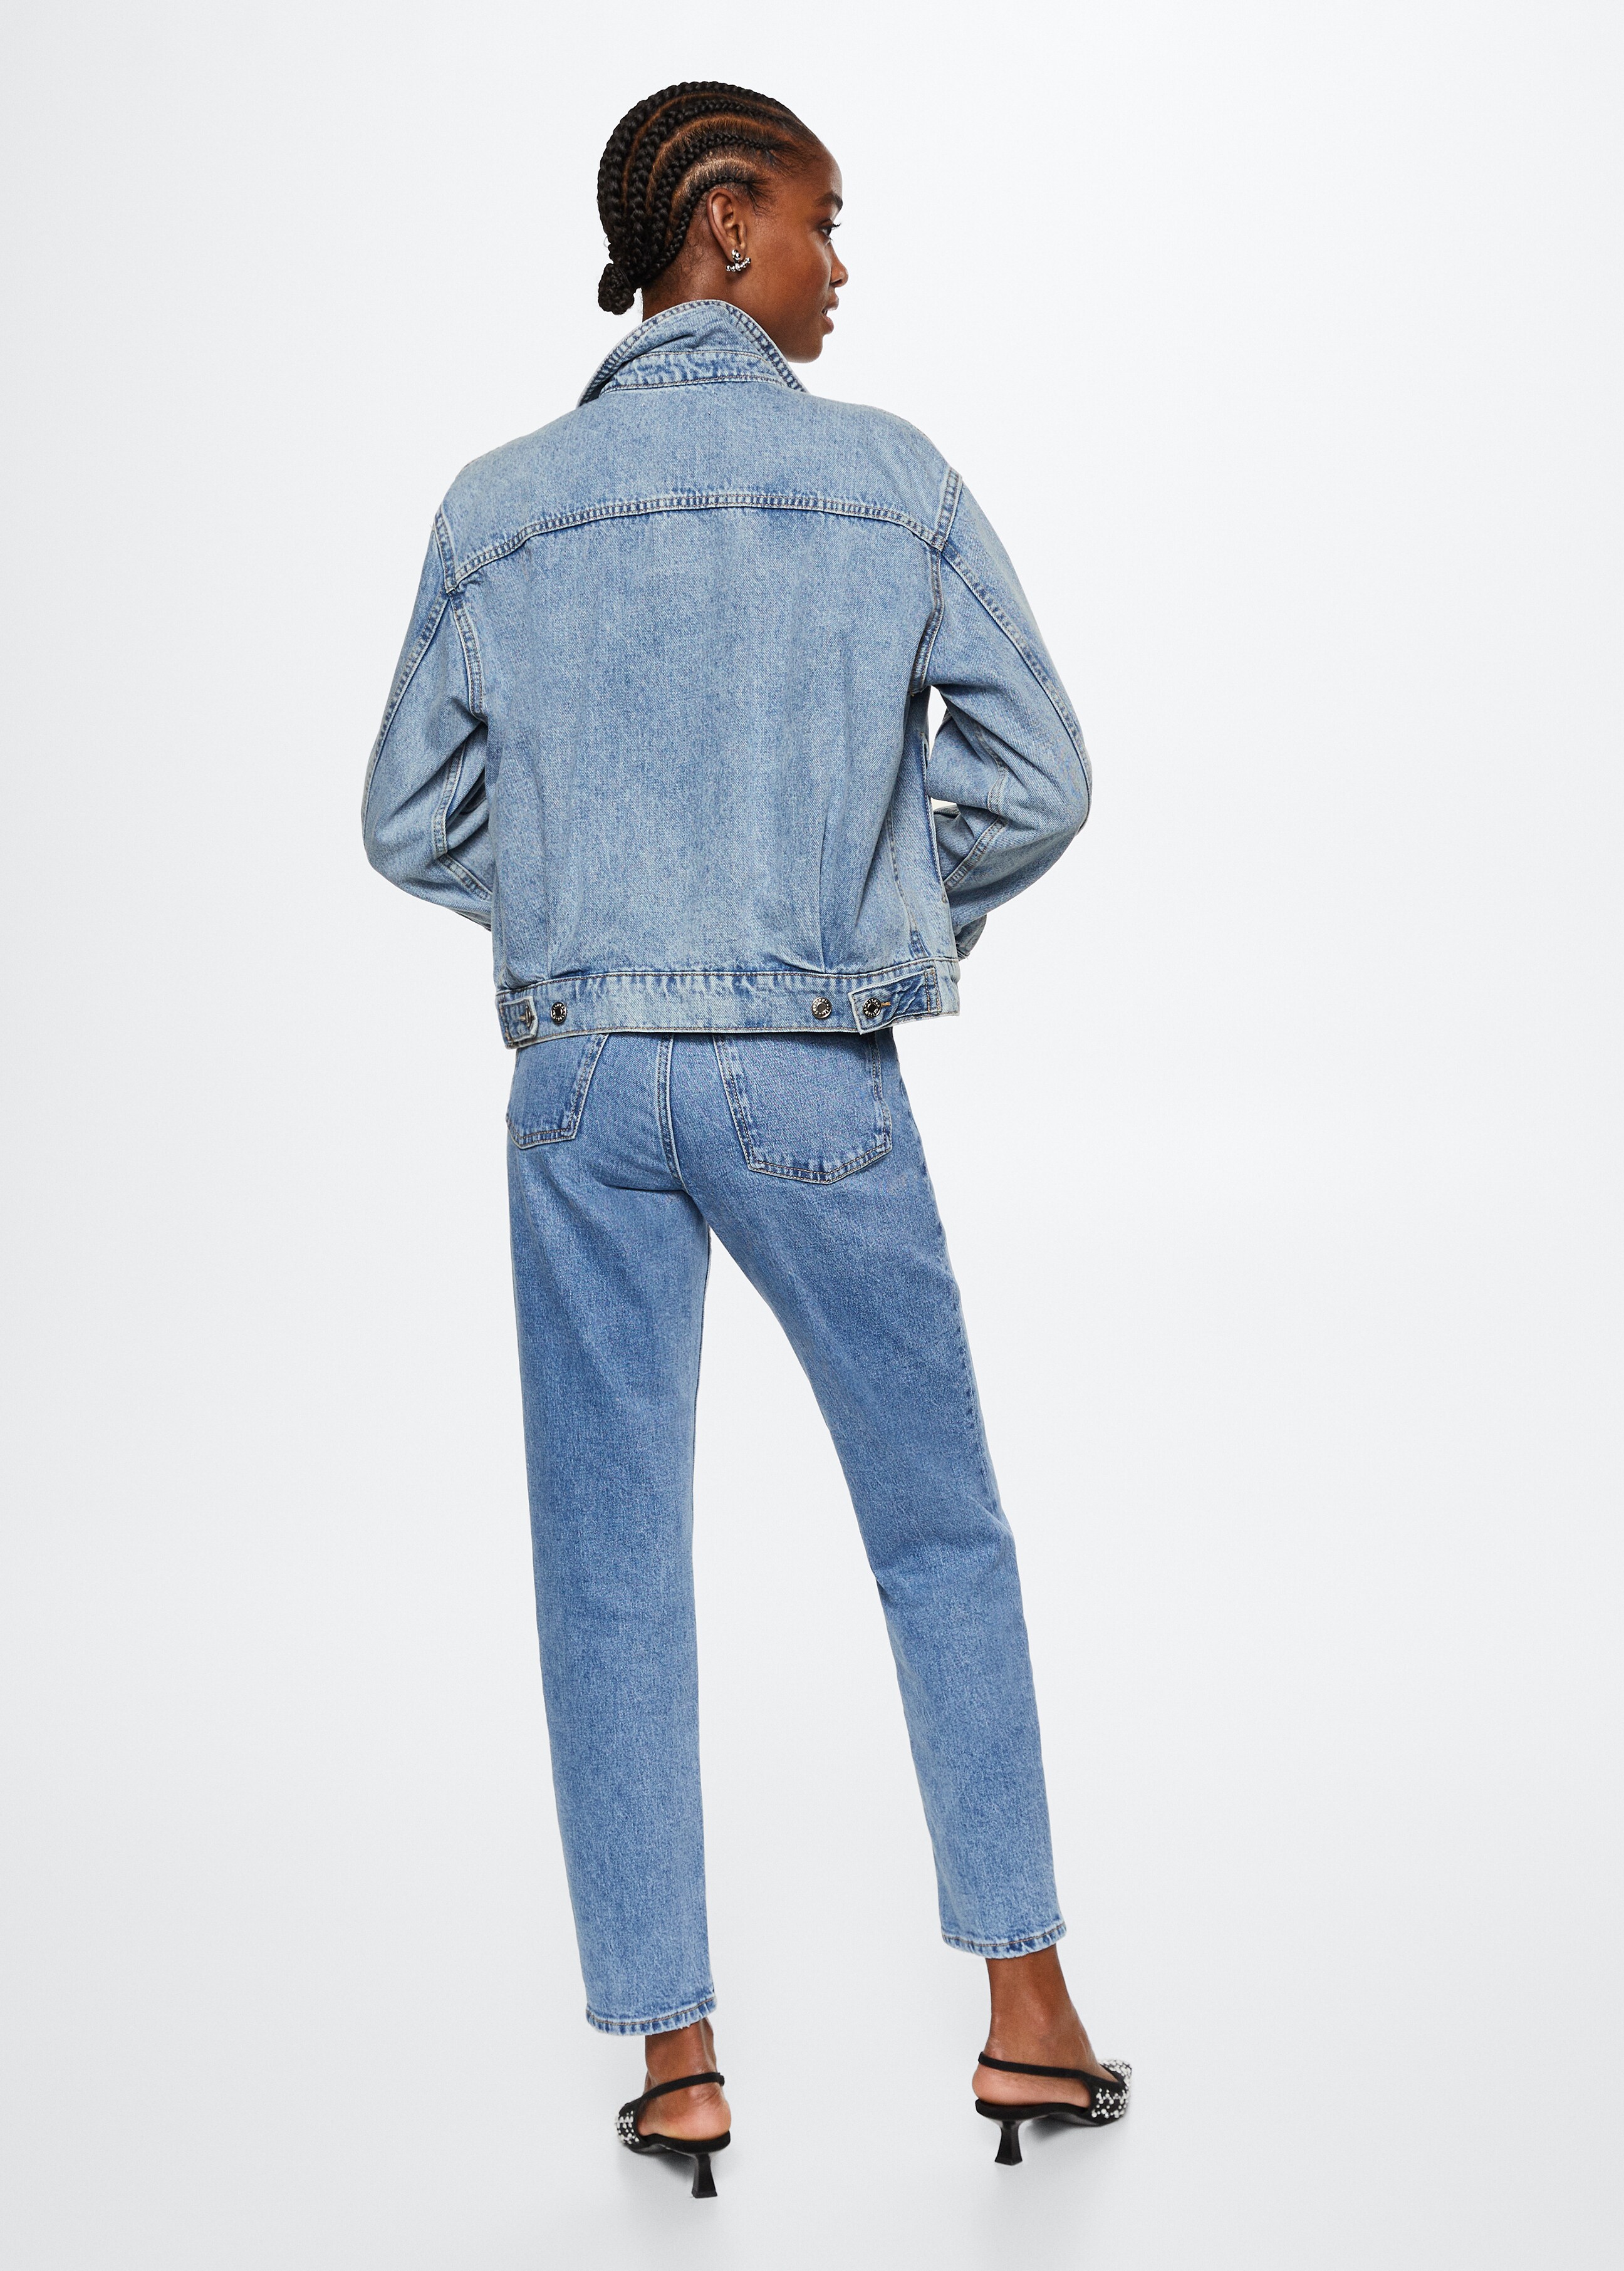 Pocketed denim jacket - Reverse of the article